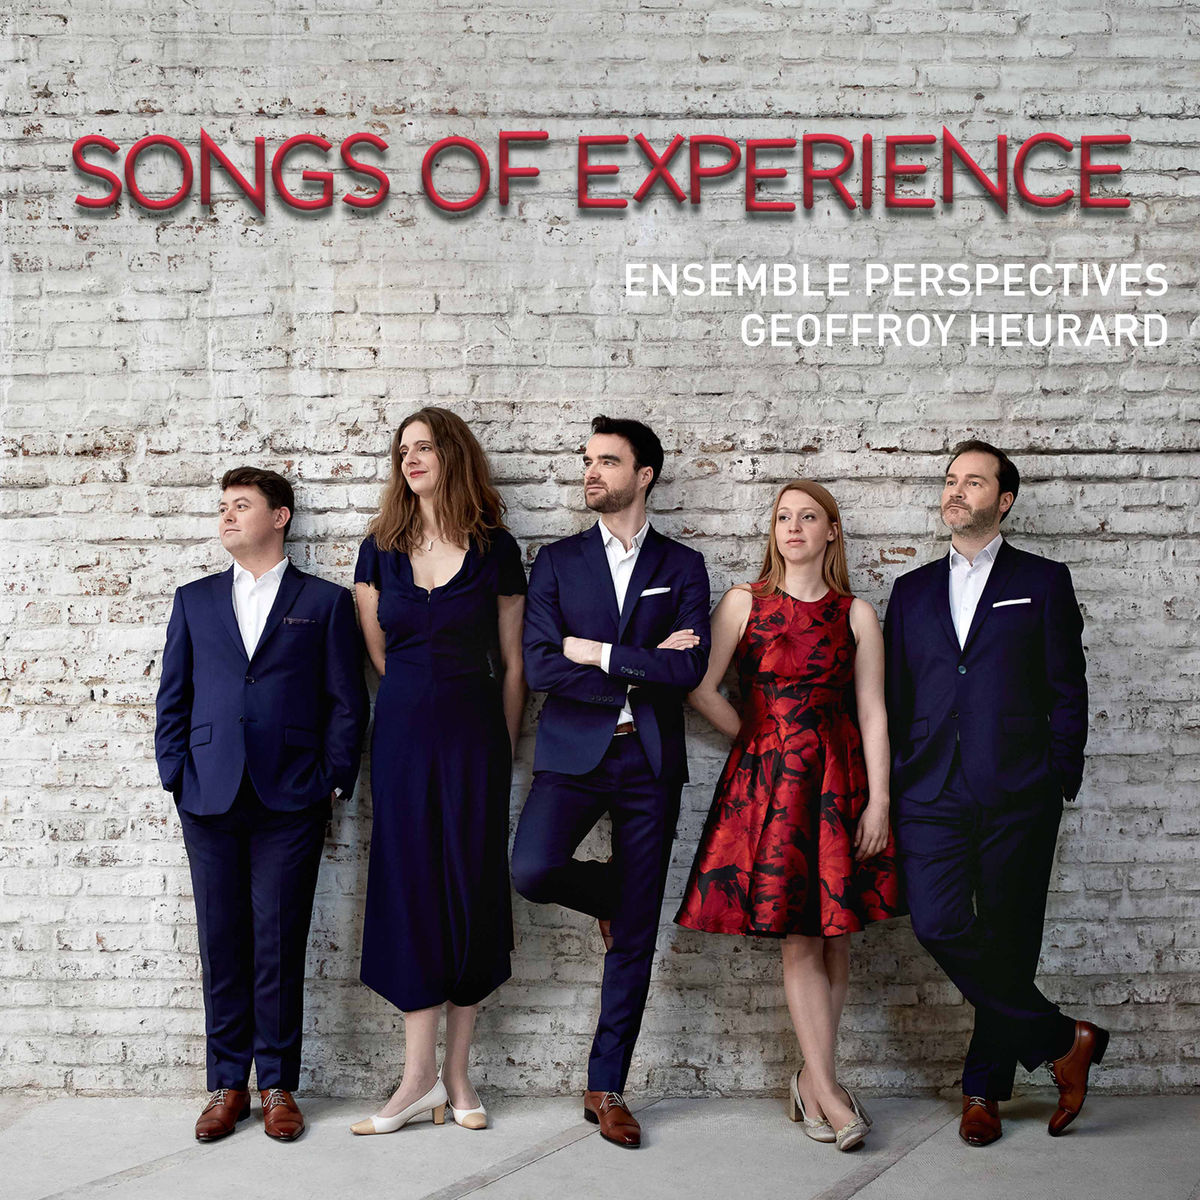 Ensemble Perspectives & Geoffroy Heurard - Songs of Experience (2017) [Qobuz FLAC 24bit/96kHz]